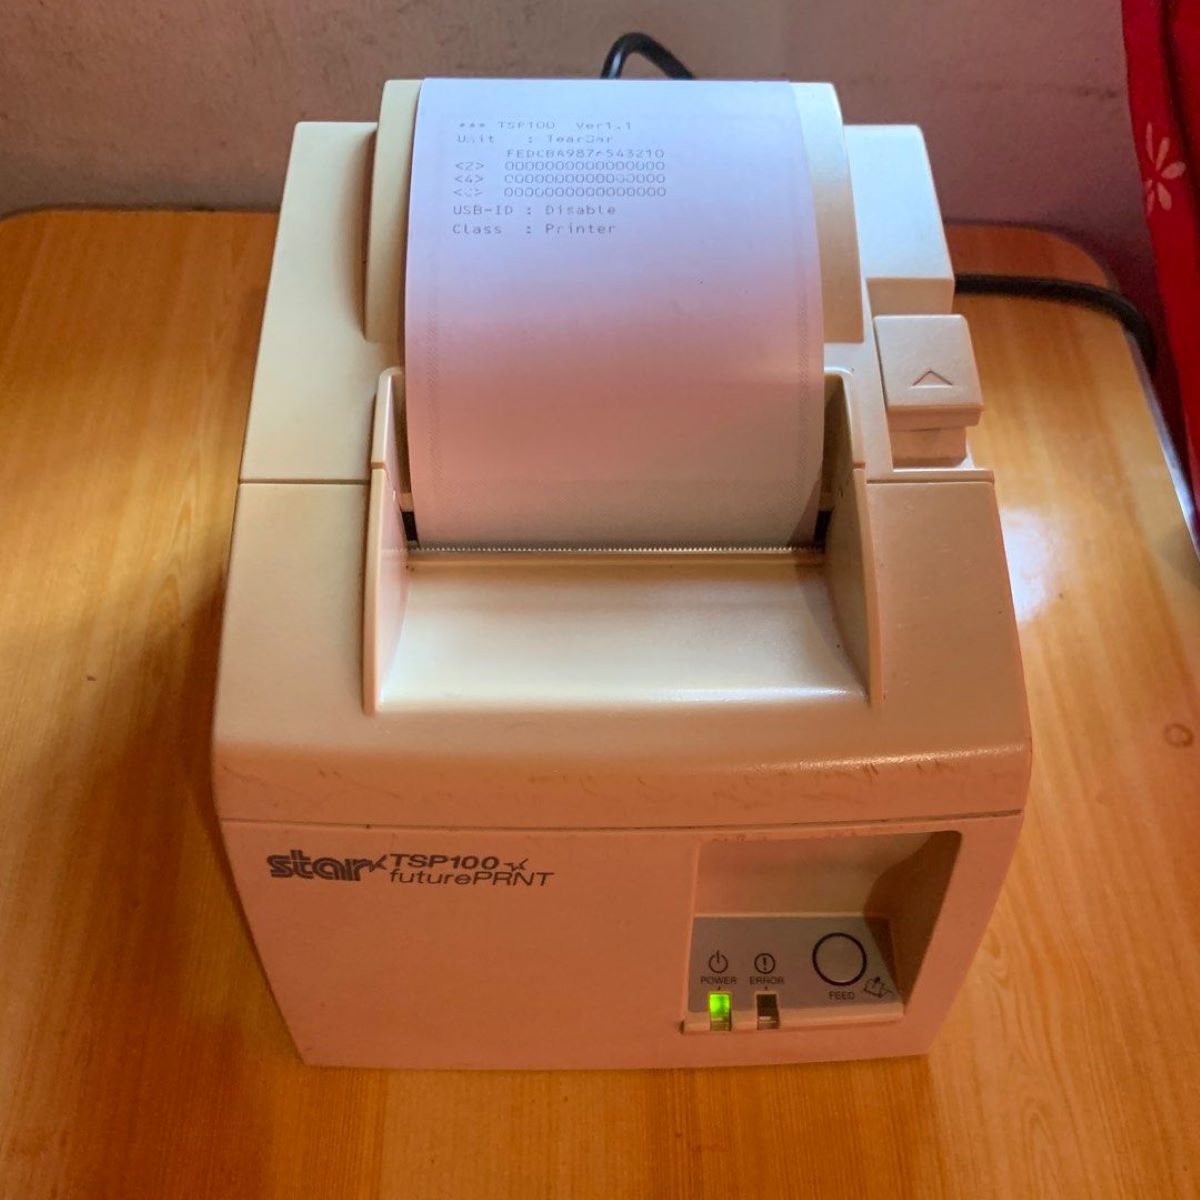 How To Connect Star TSP100 Printer To Wi-Fi